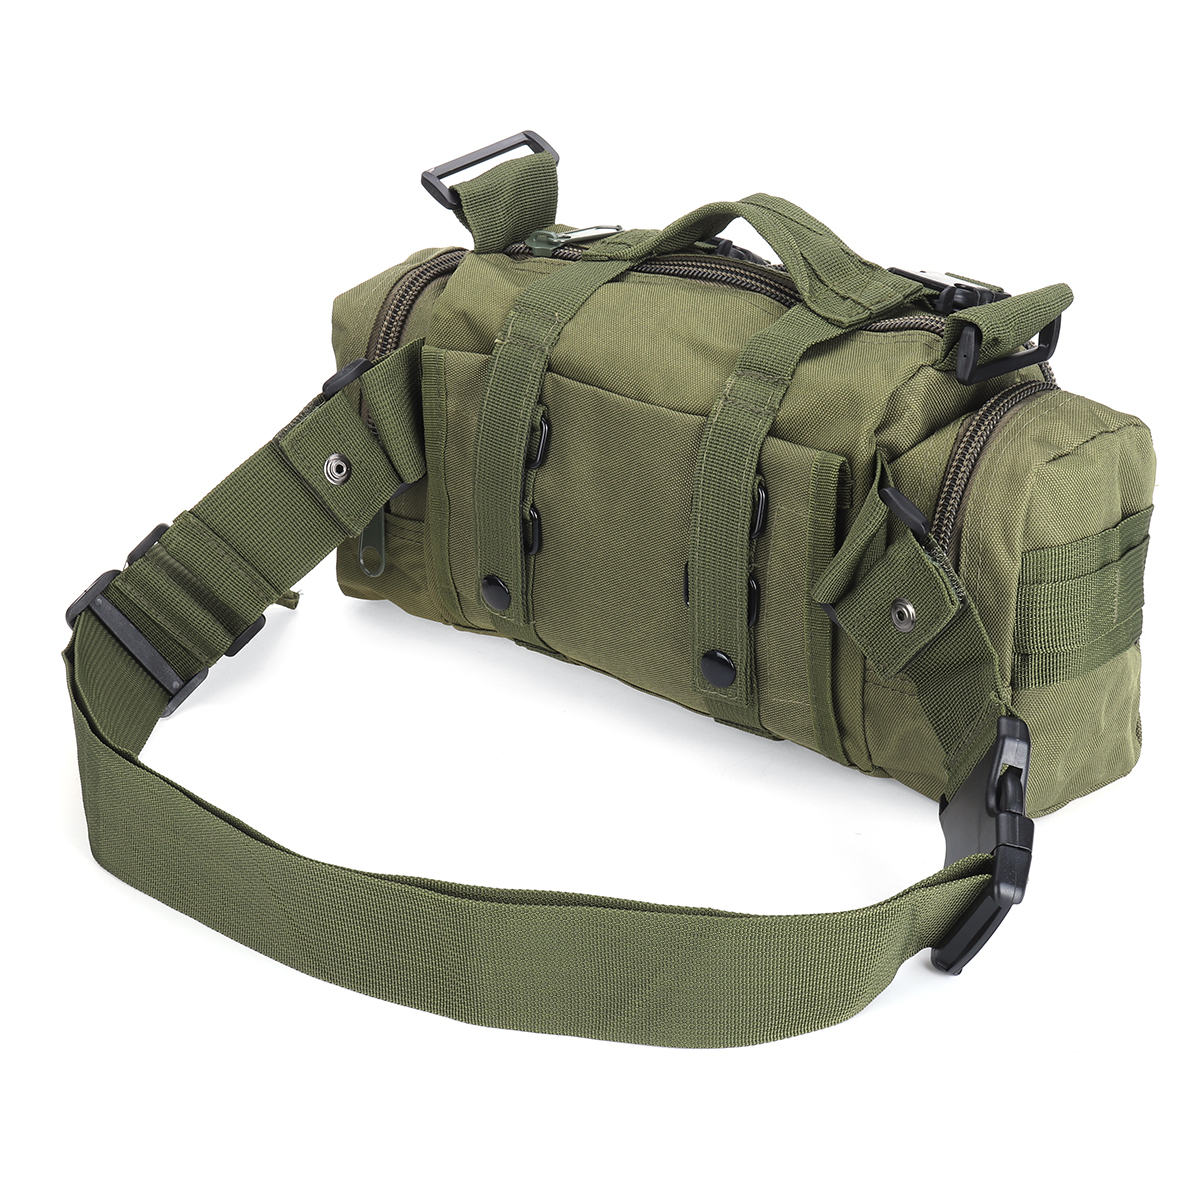 Multifunctional-Outdoor-Sports-Hiking-with-Zippers-Nylon-Oxford-Cloth-Tactical-Shoulder-Bag-Waist-Pa-1825563-4